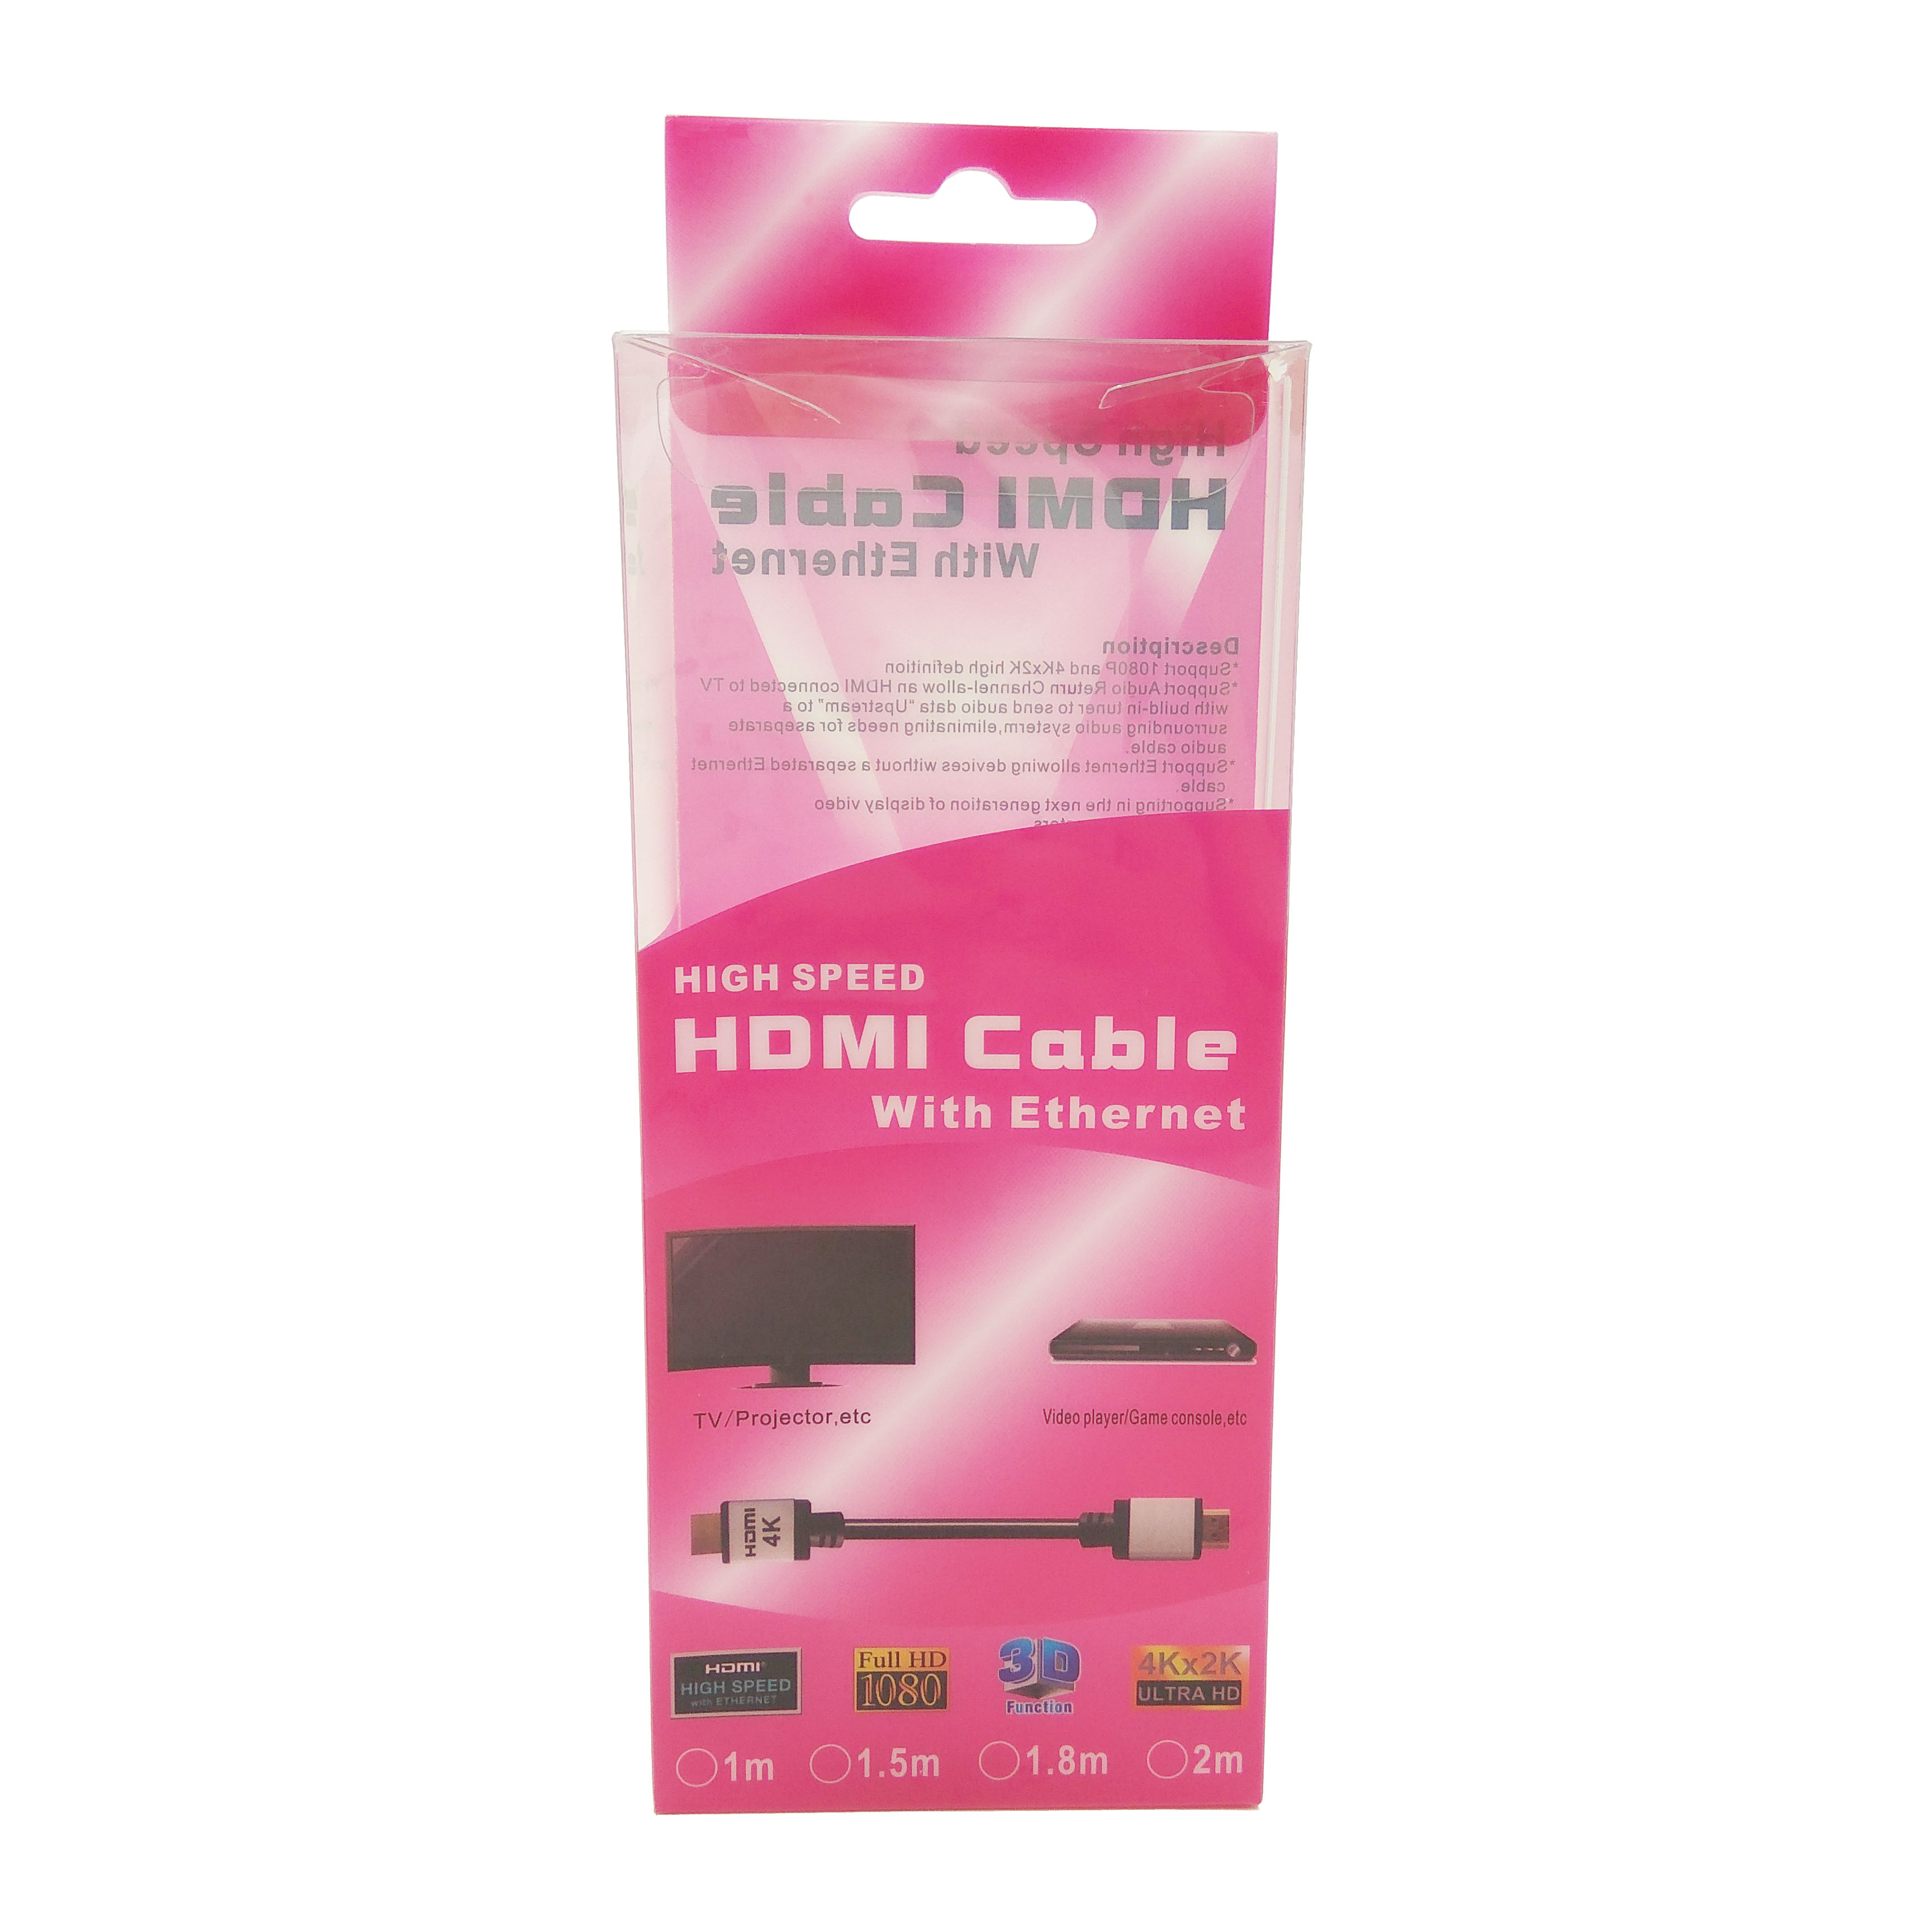 Plastic Printing Retail/Wholesale Tuck-End Closure Box for HDMI Cable